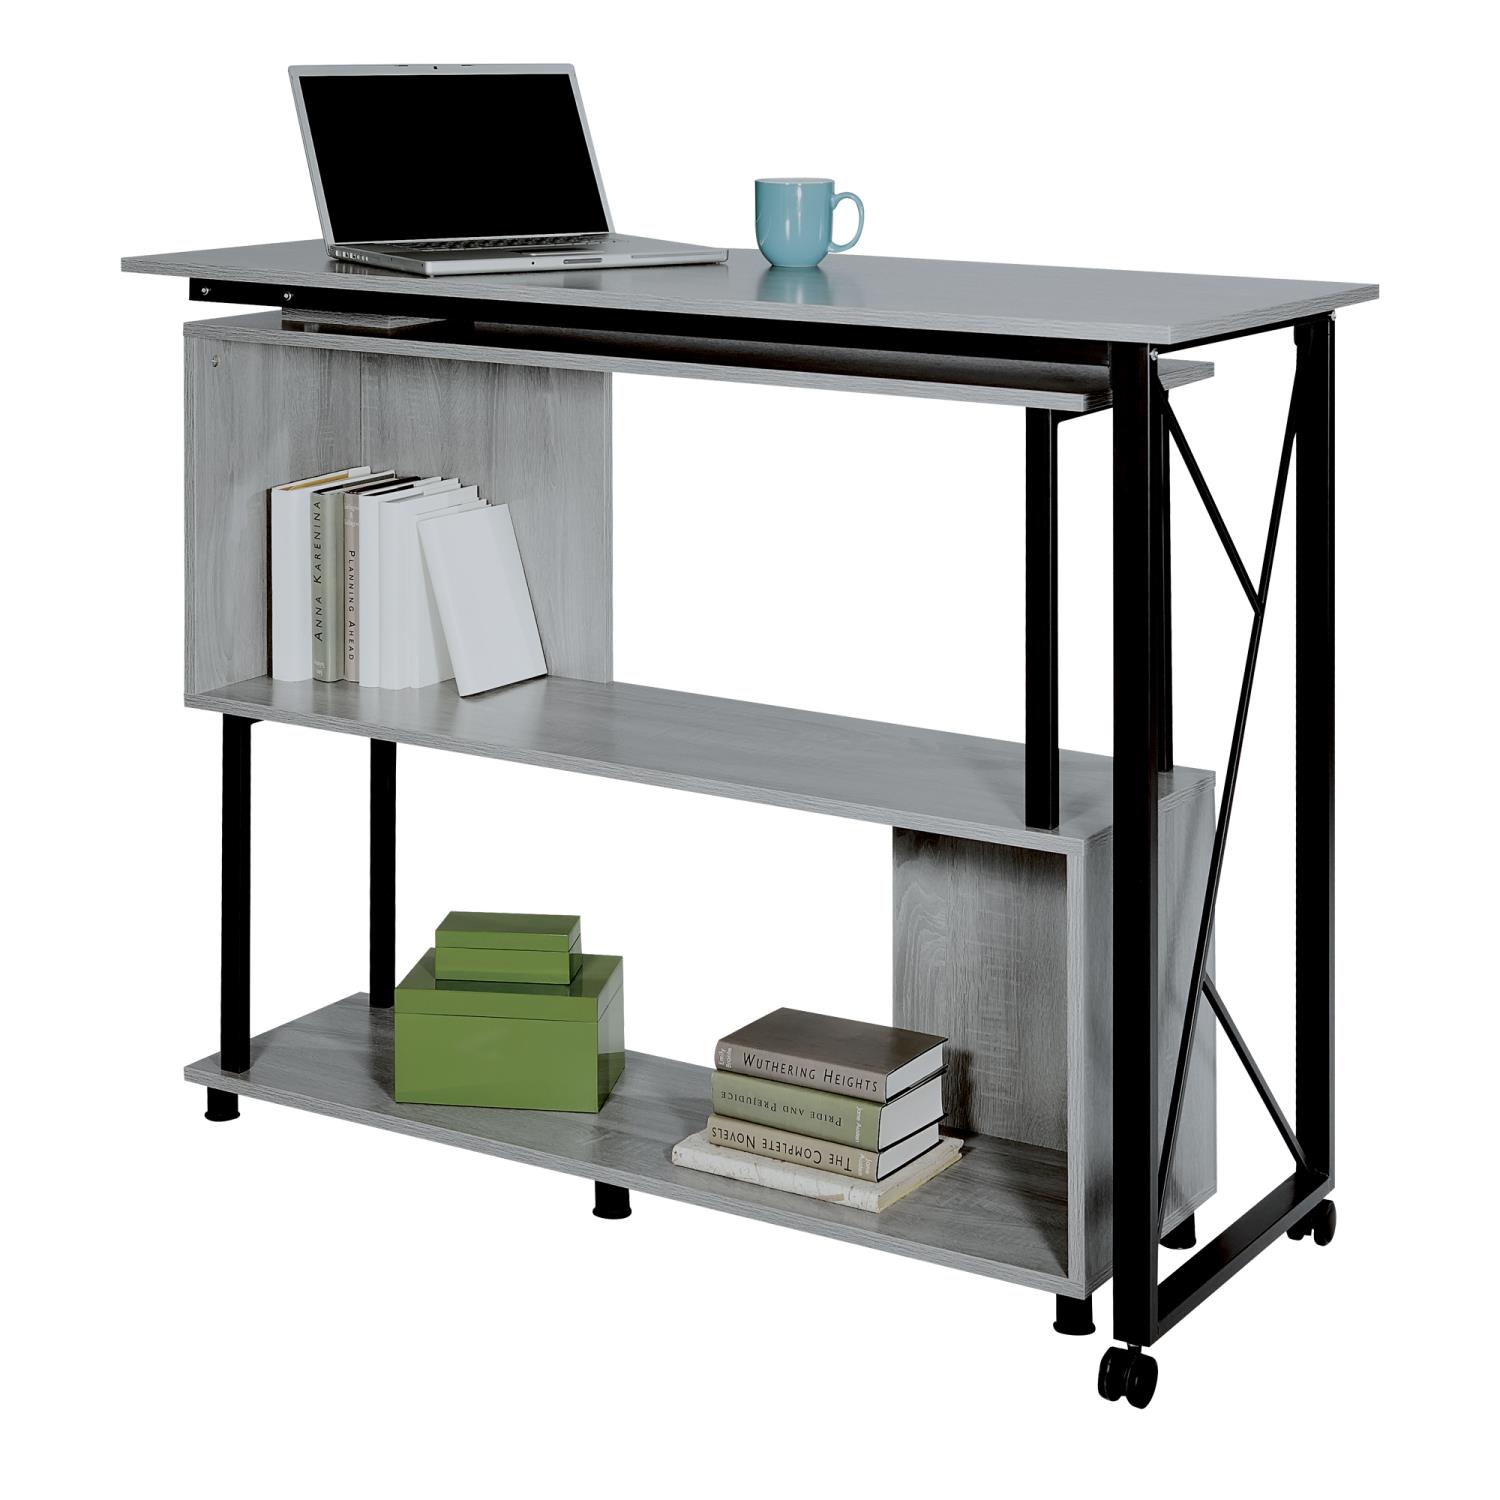 Safco Products Safco Mood Standing Height Desk With Rotating Work Surface 1904GR